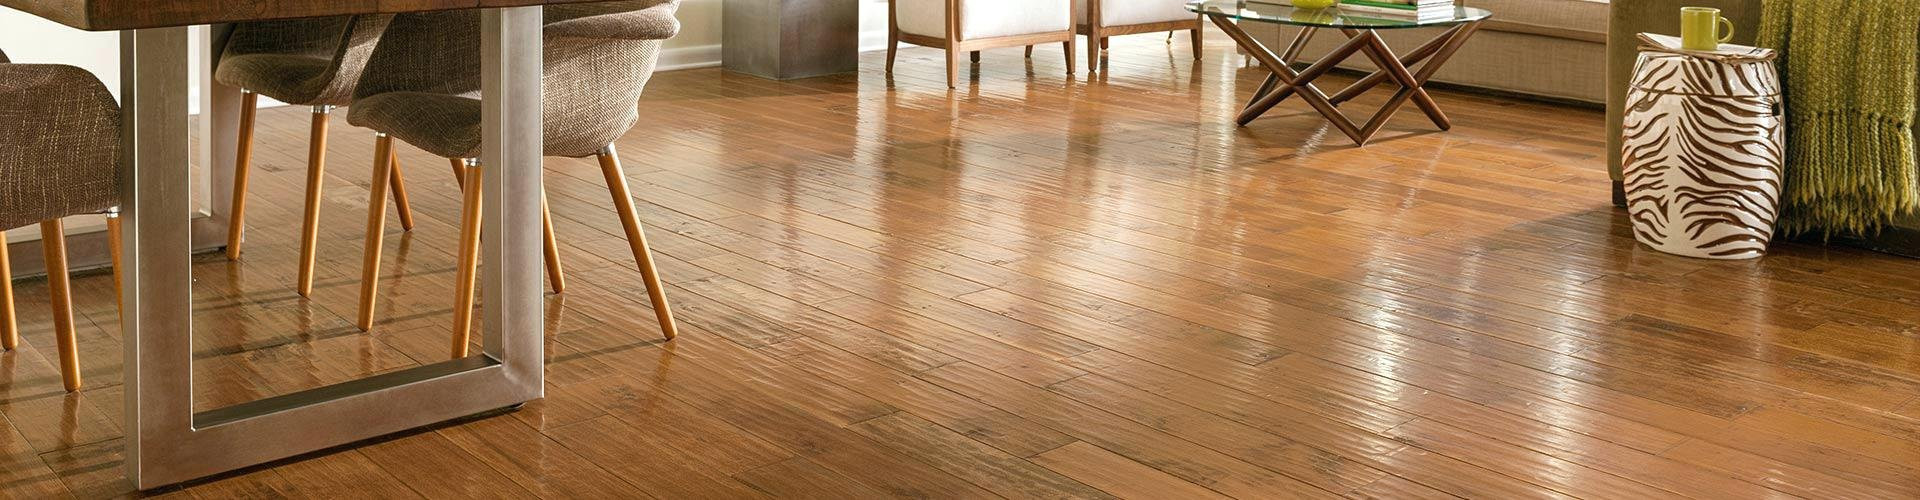 21 Cute Lowes Hardwood Flooring 2024 free download lowes hardwood flooring of download 30 luxury ceramic floor tile lowes missing person search com throughout ceramic floor tile lowes fresh od grain tile bathroom wood shower no grout porcela